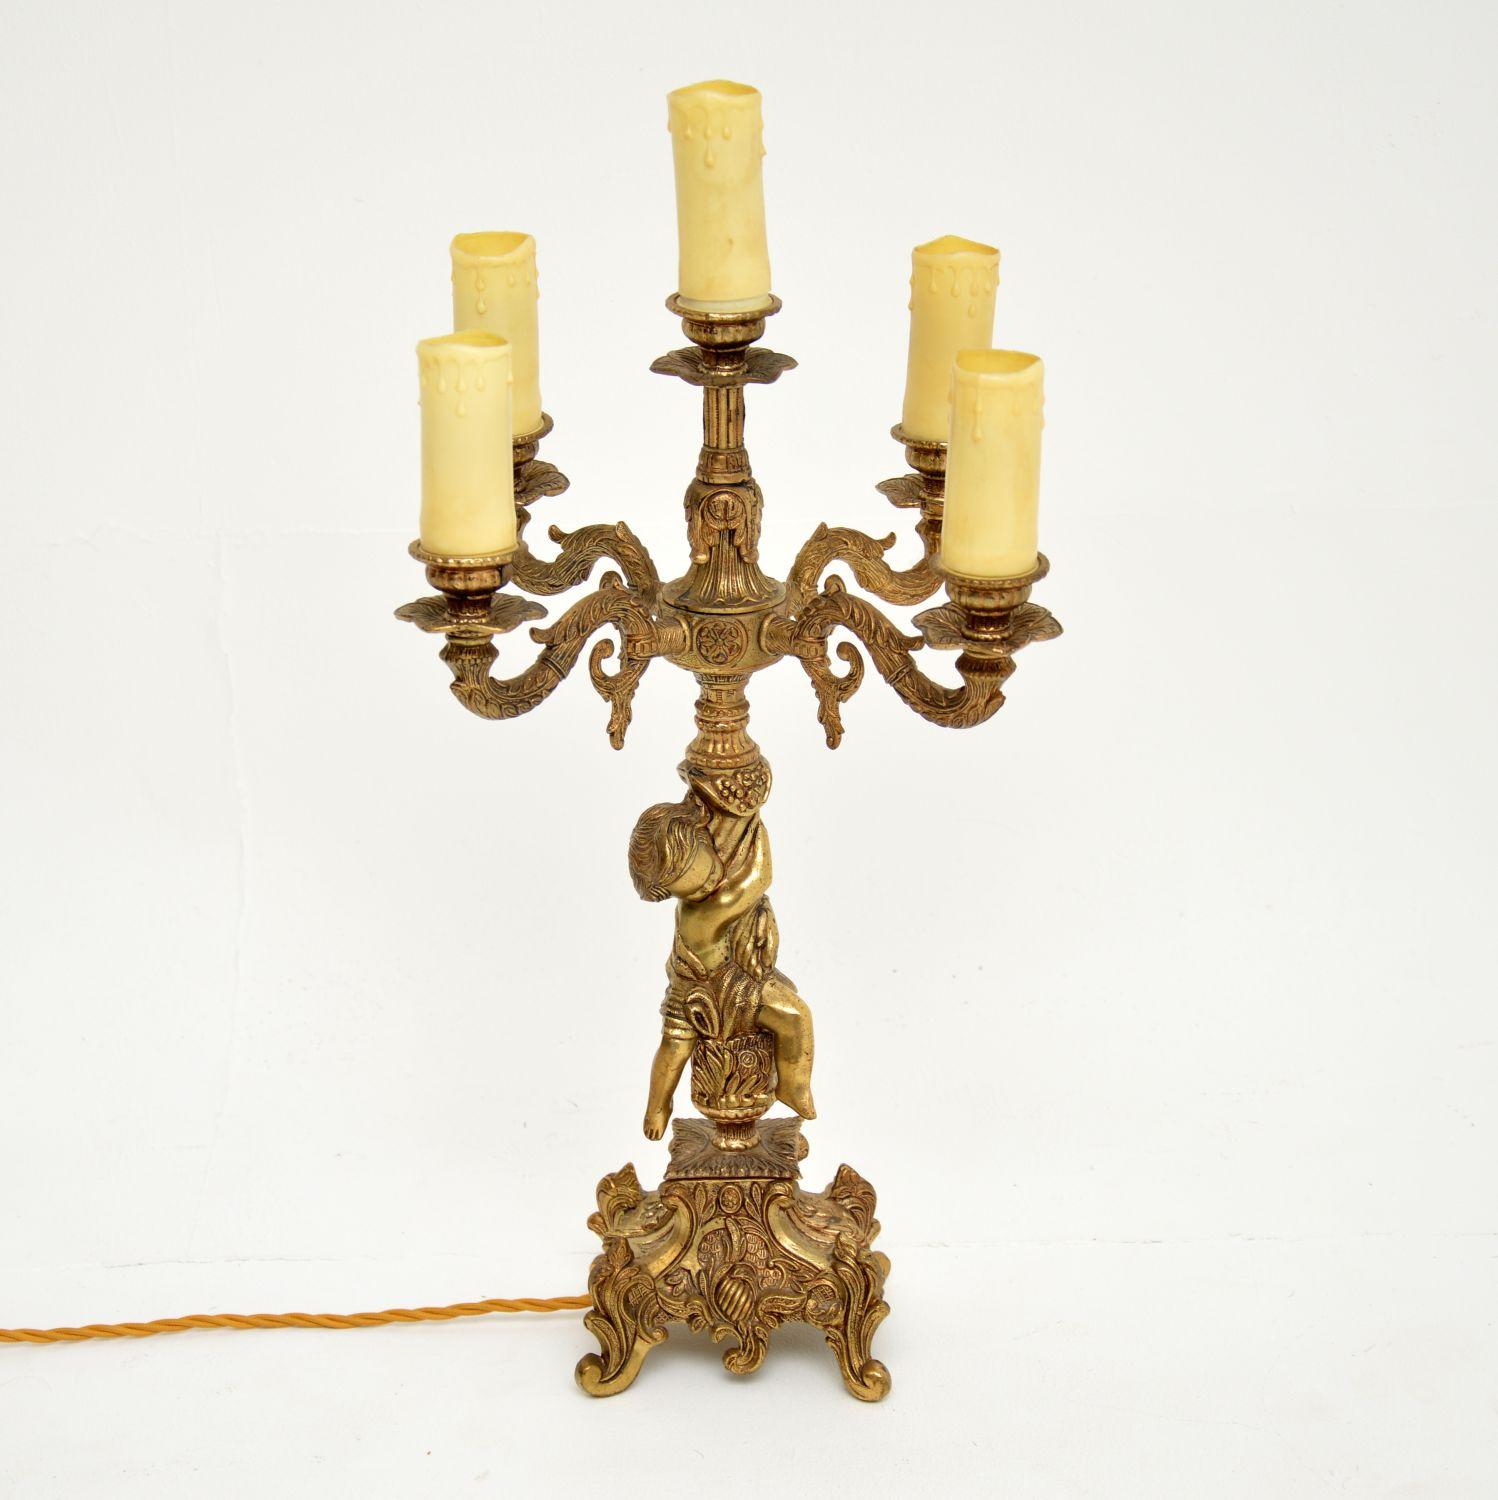 A gorgeous antique French candelabra table lamp in gilt metal. This was made in France, it dates from around the 1920-1930’s.

The quality is lovely, this is cast in wonderful detail and depicts a beautiful cherub supporting the main column. There